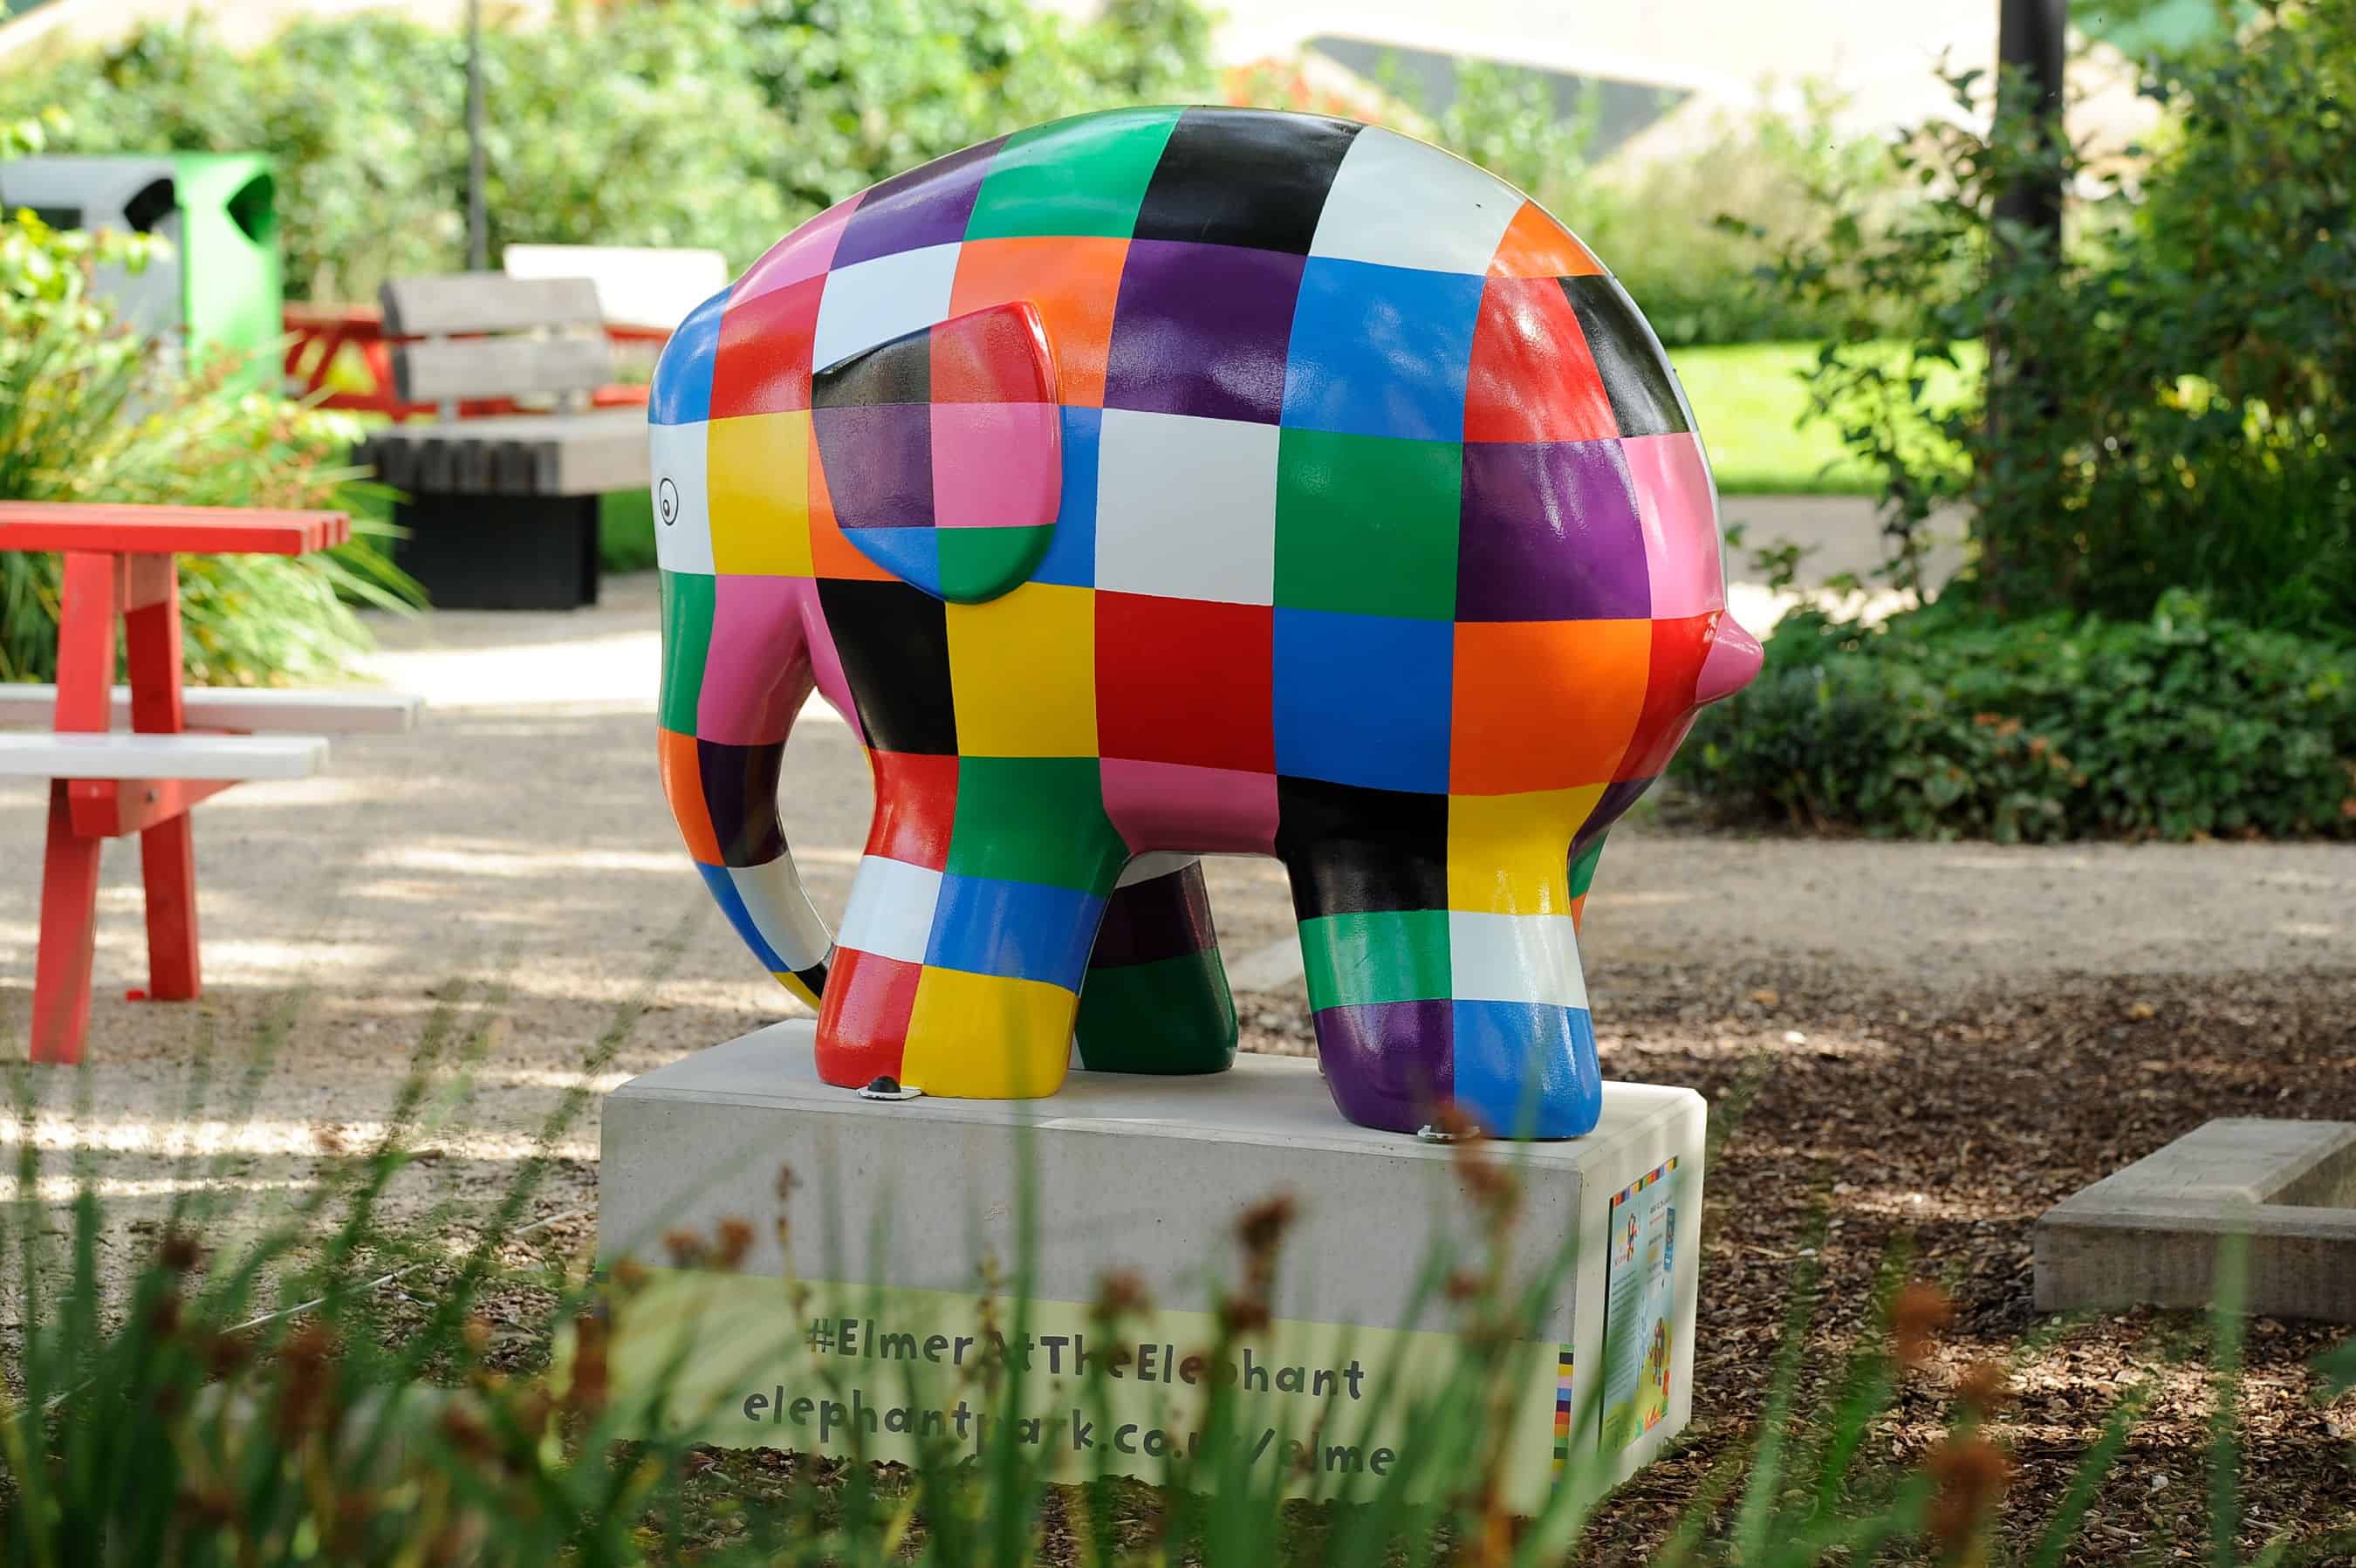 The iconic children's character Elmer the Elephant has come to Elephant and Castle in s series of sculptures